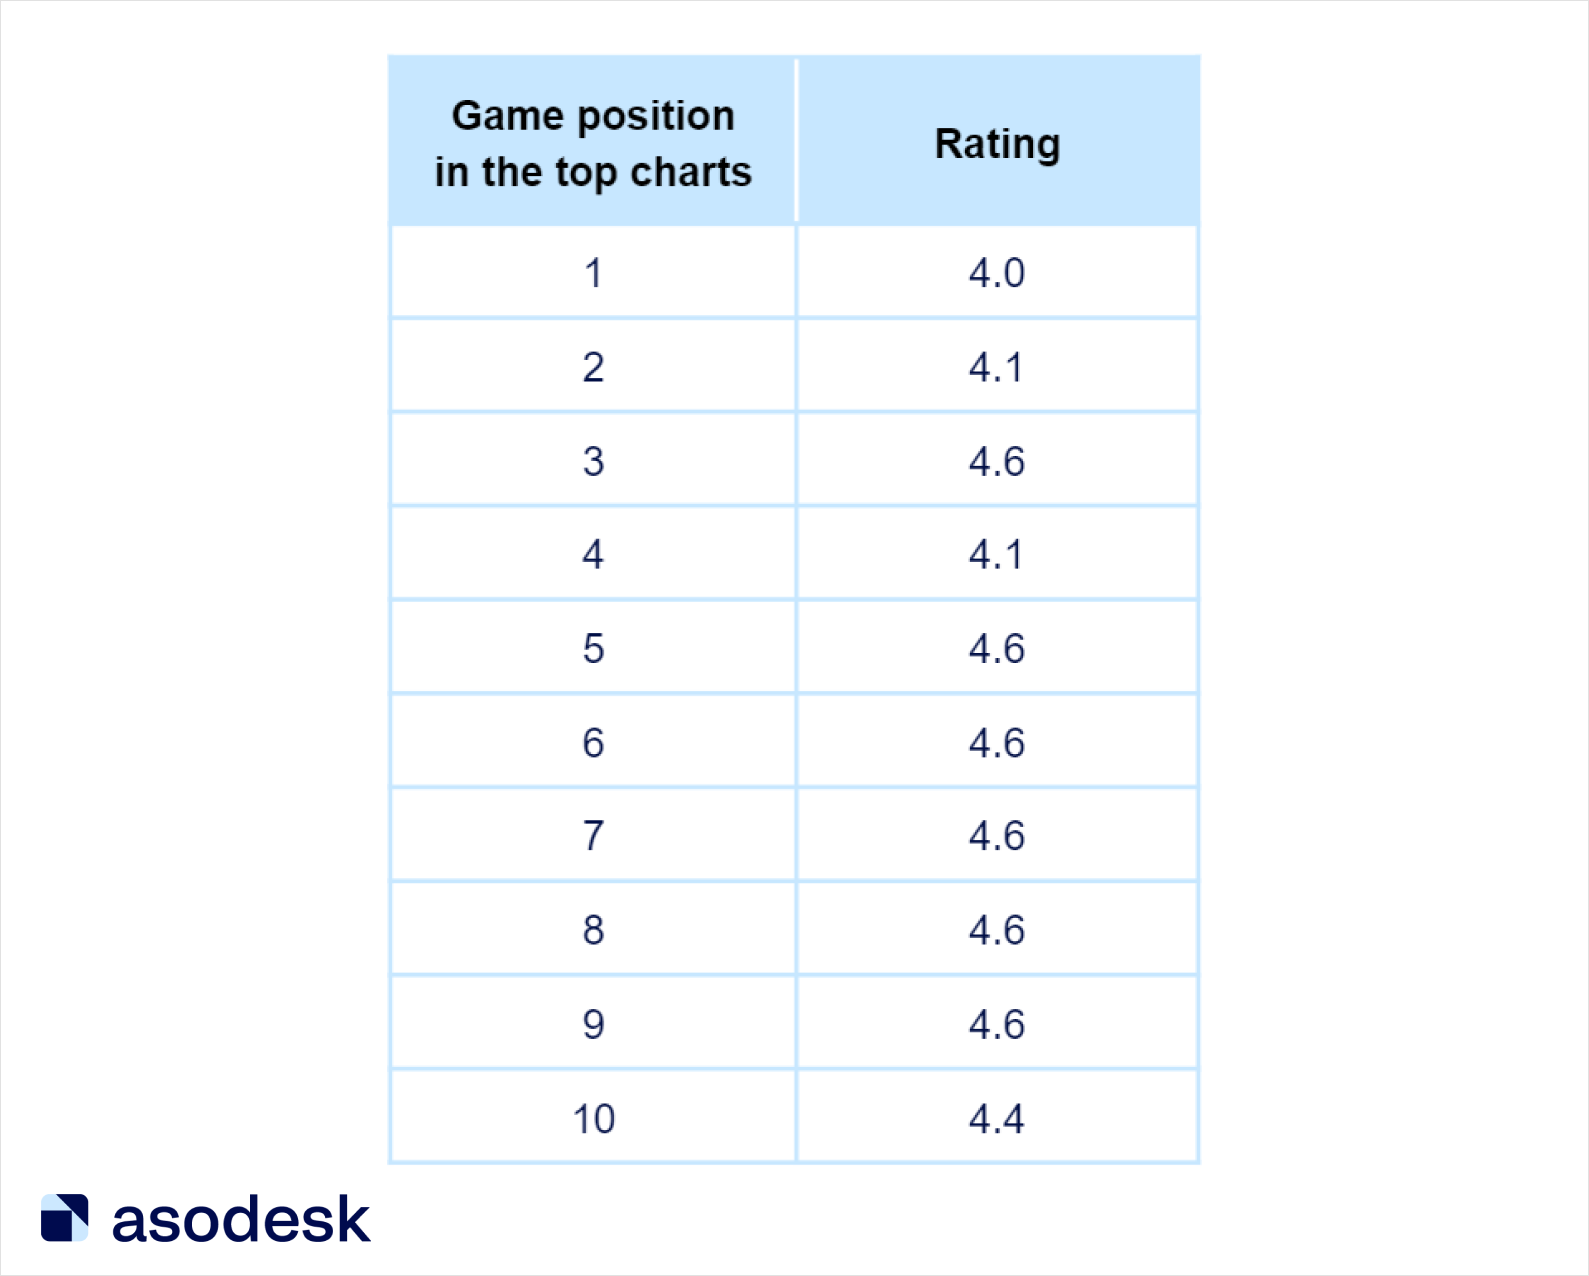 Average rating of games from the top charts in the App Store, depending on their position in the search